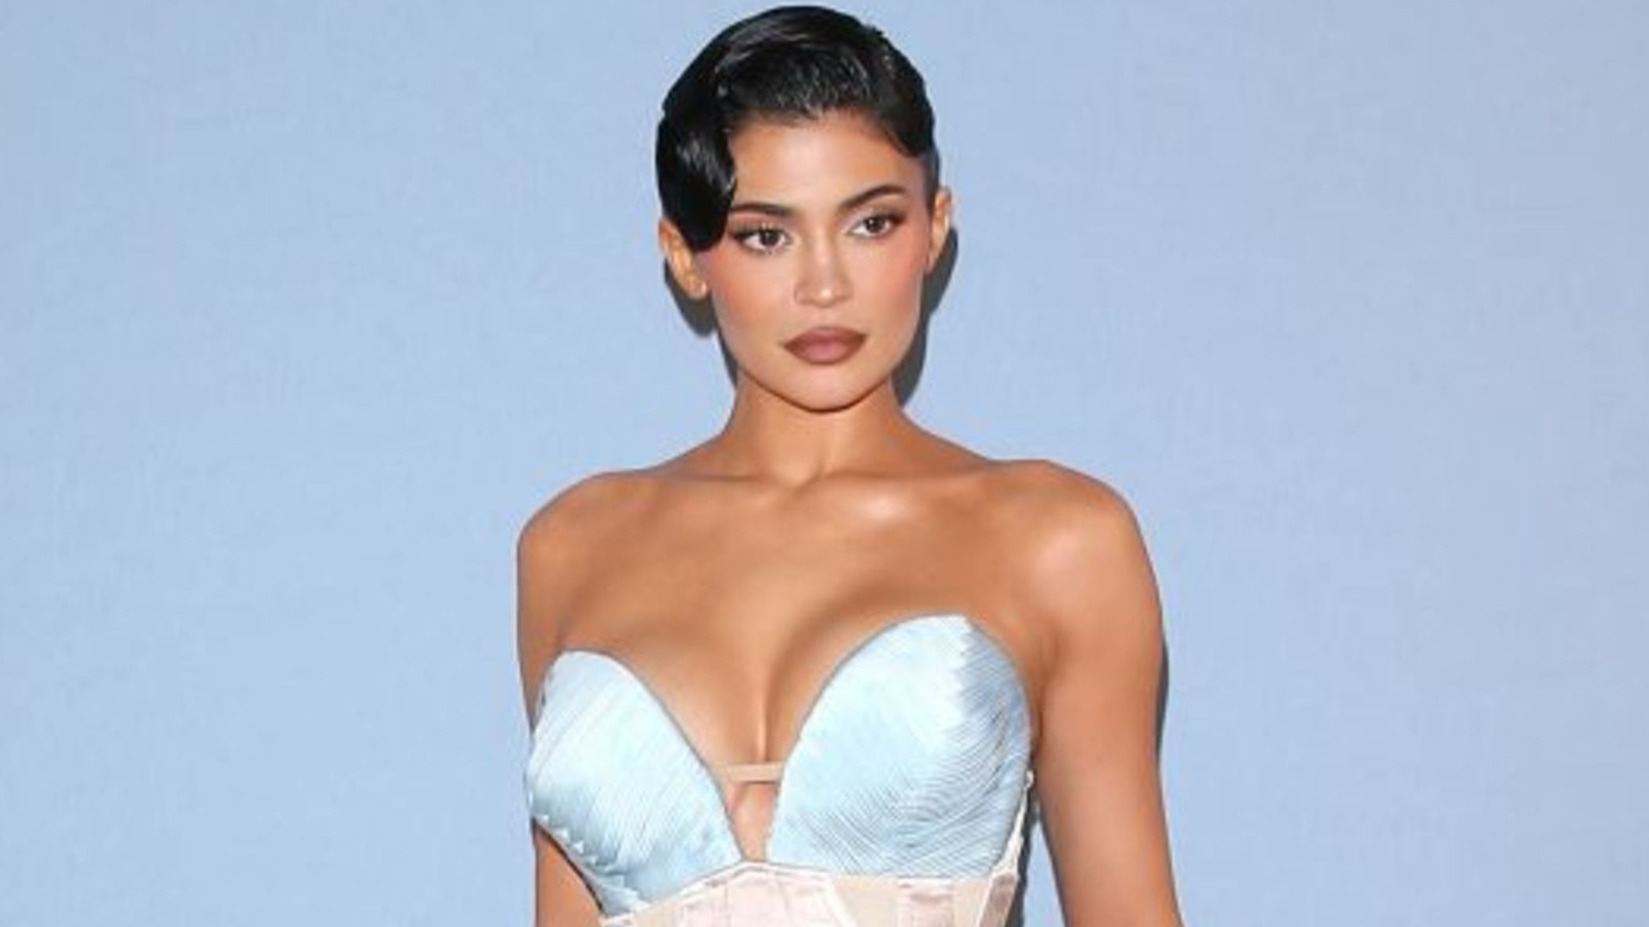 Kylie Jenner had a boob job at 19 but wishes she didn't: 'I had beautiful  breasts